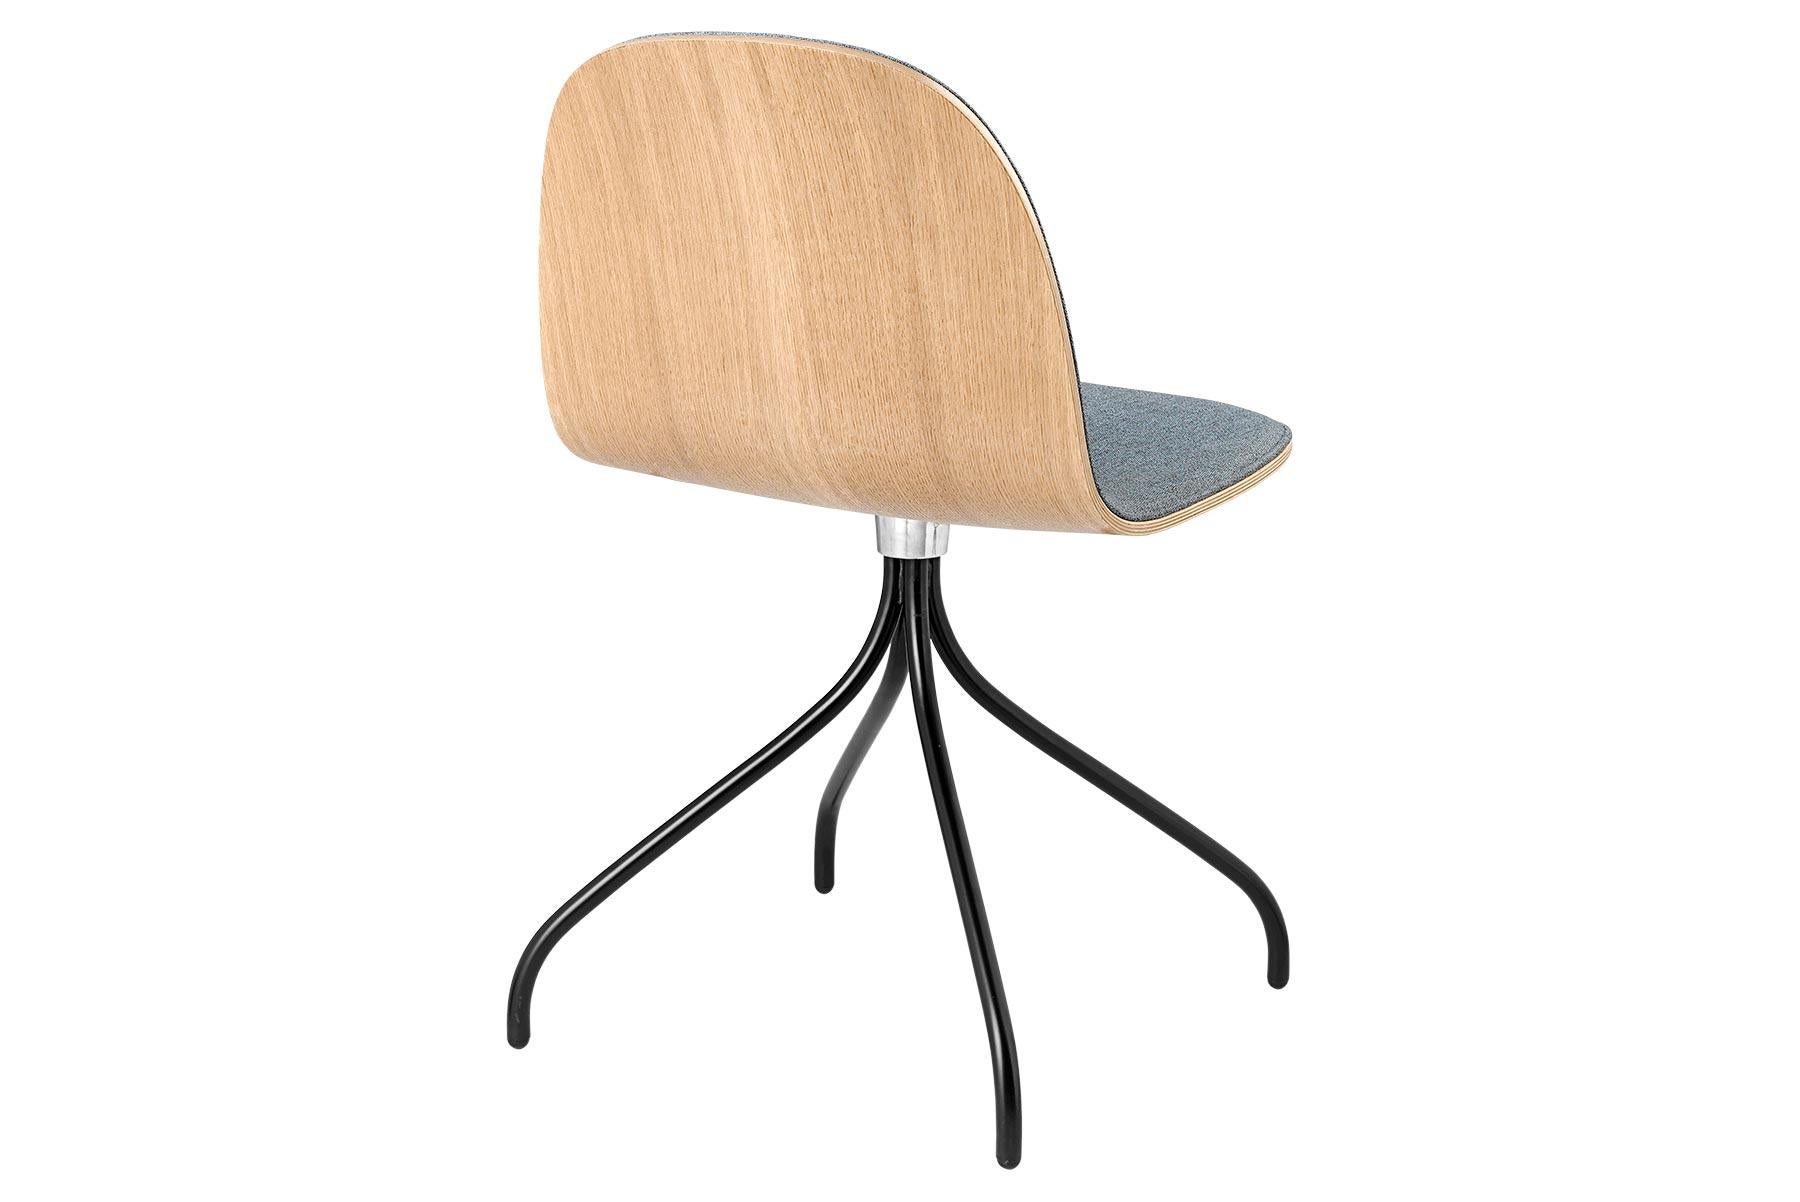 The GUBI 2D Chair is a series of light dining chairs made from laminated veneer with options for front upholstery in a wide range of fabrics and leathers, suitable for both private and public spaces. Being an extension to the Classic GUBI 3D Chair,